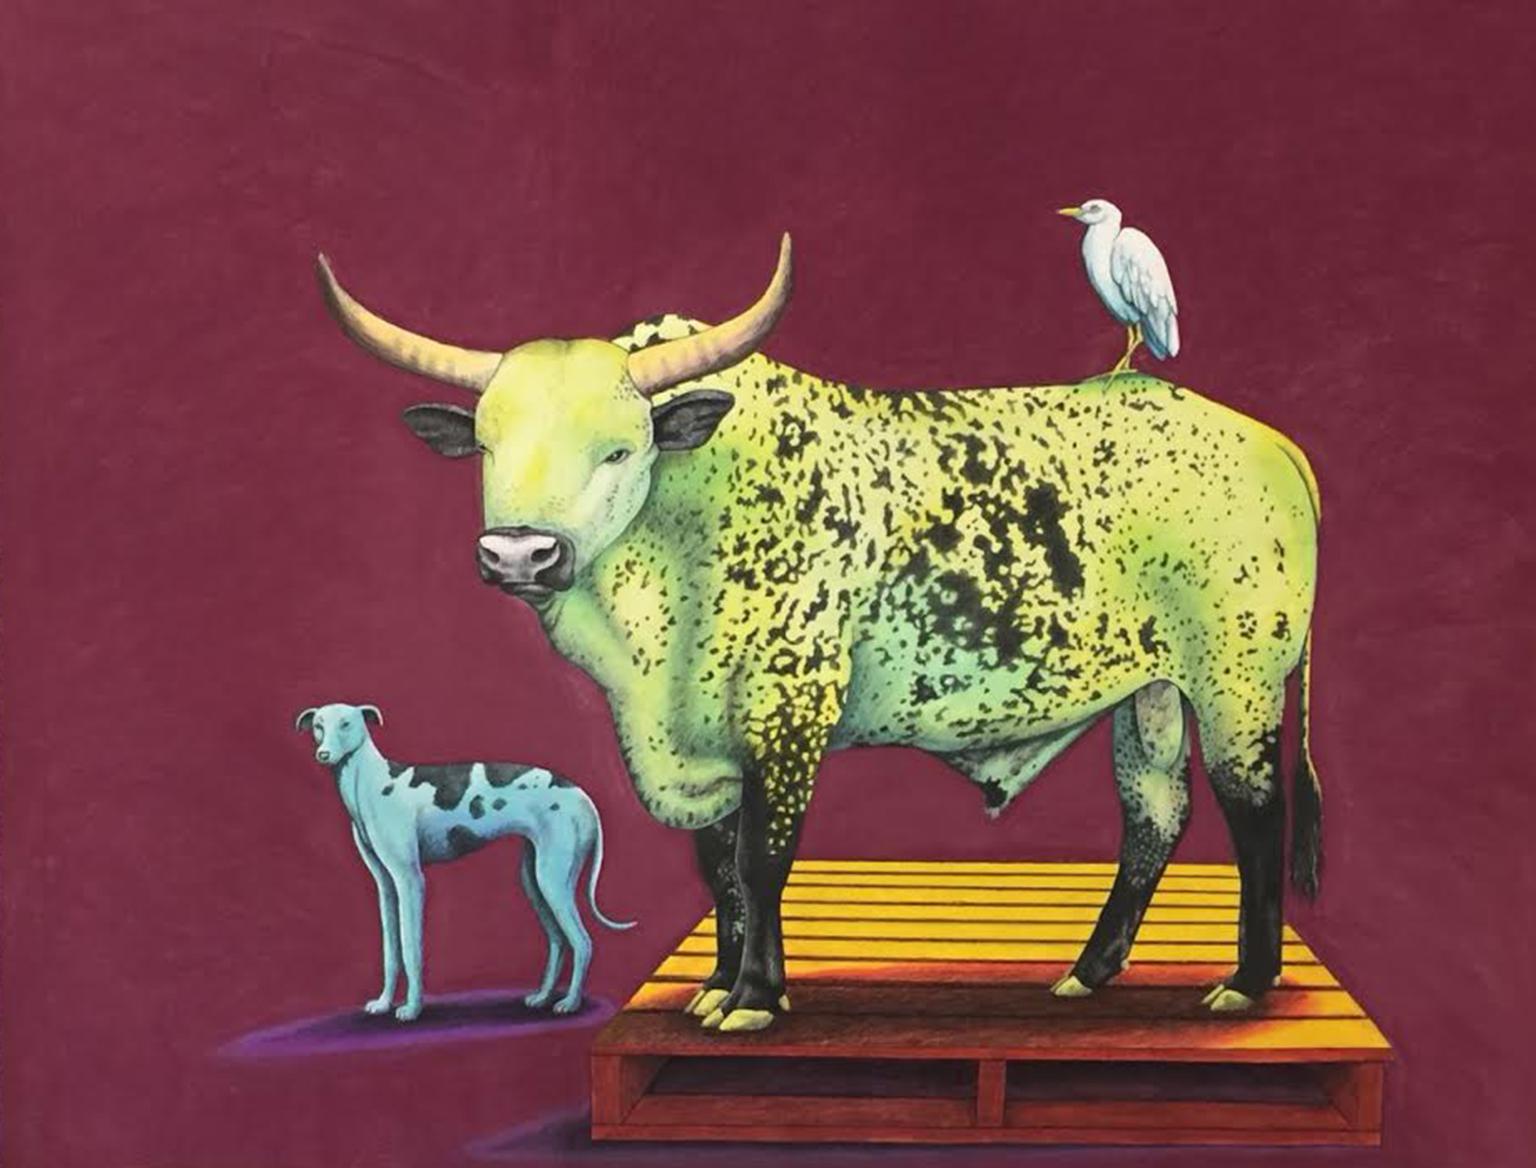 John Moore Animal Art - Green Cow, Blue Dog - Contemporary, Pastel on Fabriano Paper, 21st Century